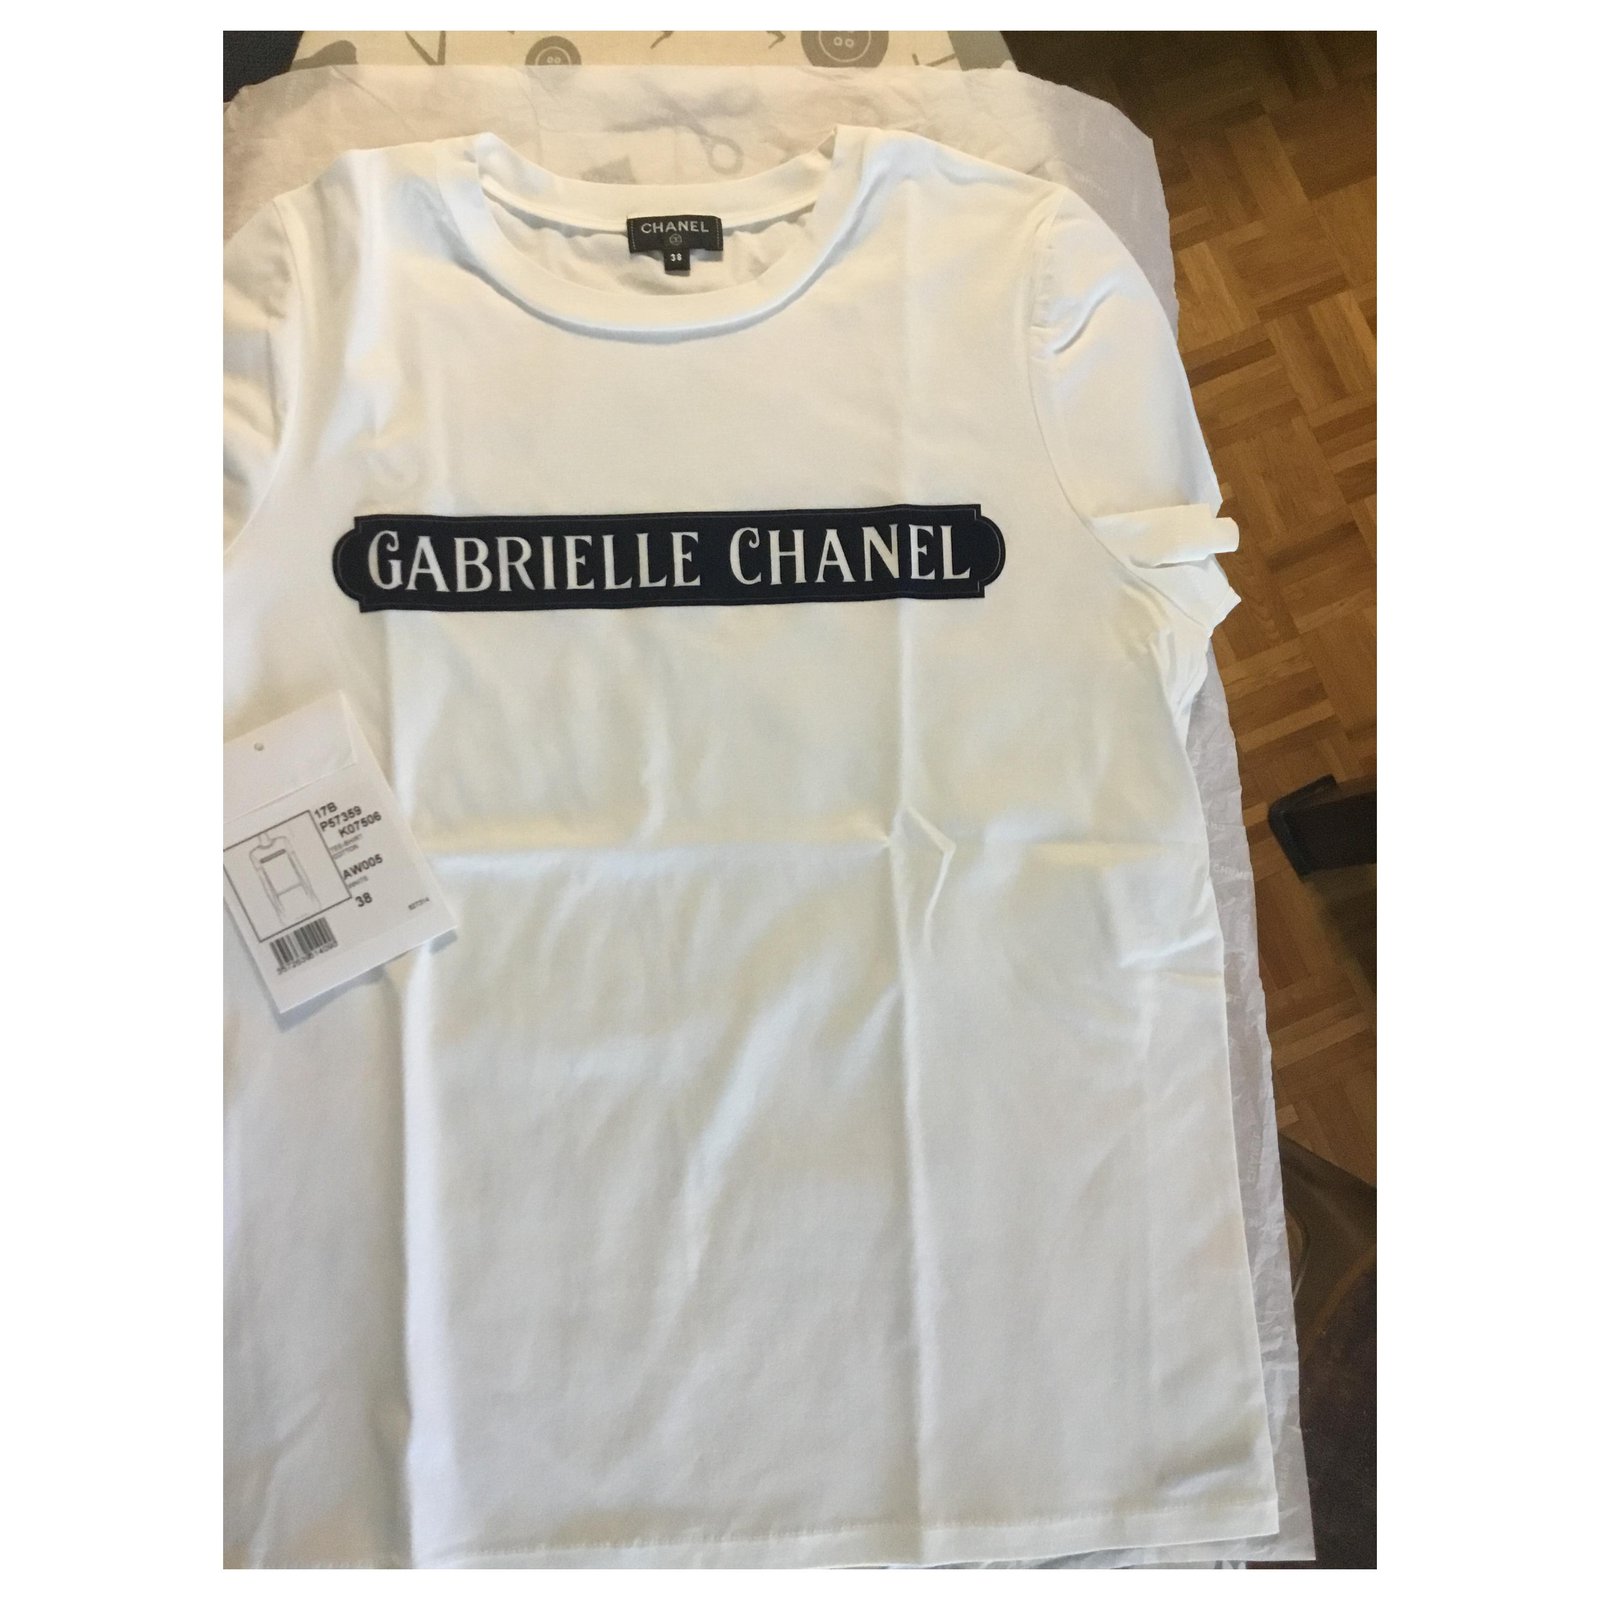 Get the best deals on CHANEL White Cotton Tops for Women when you